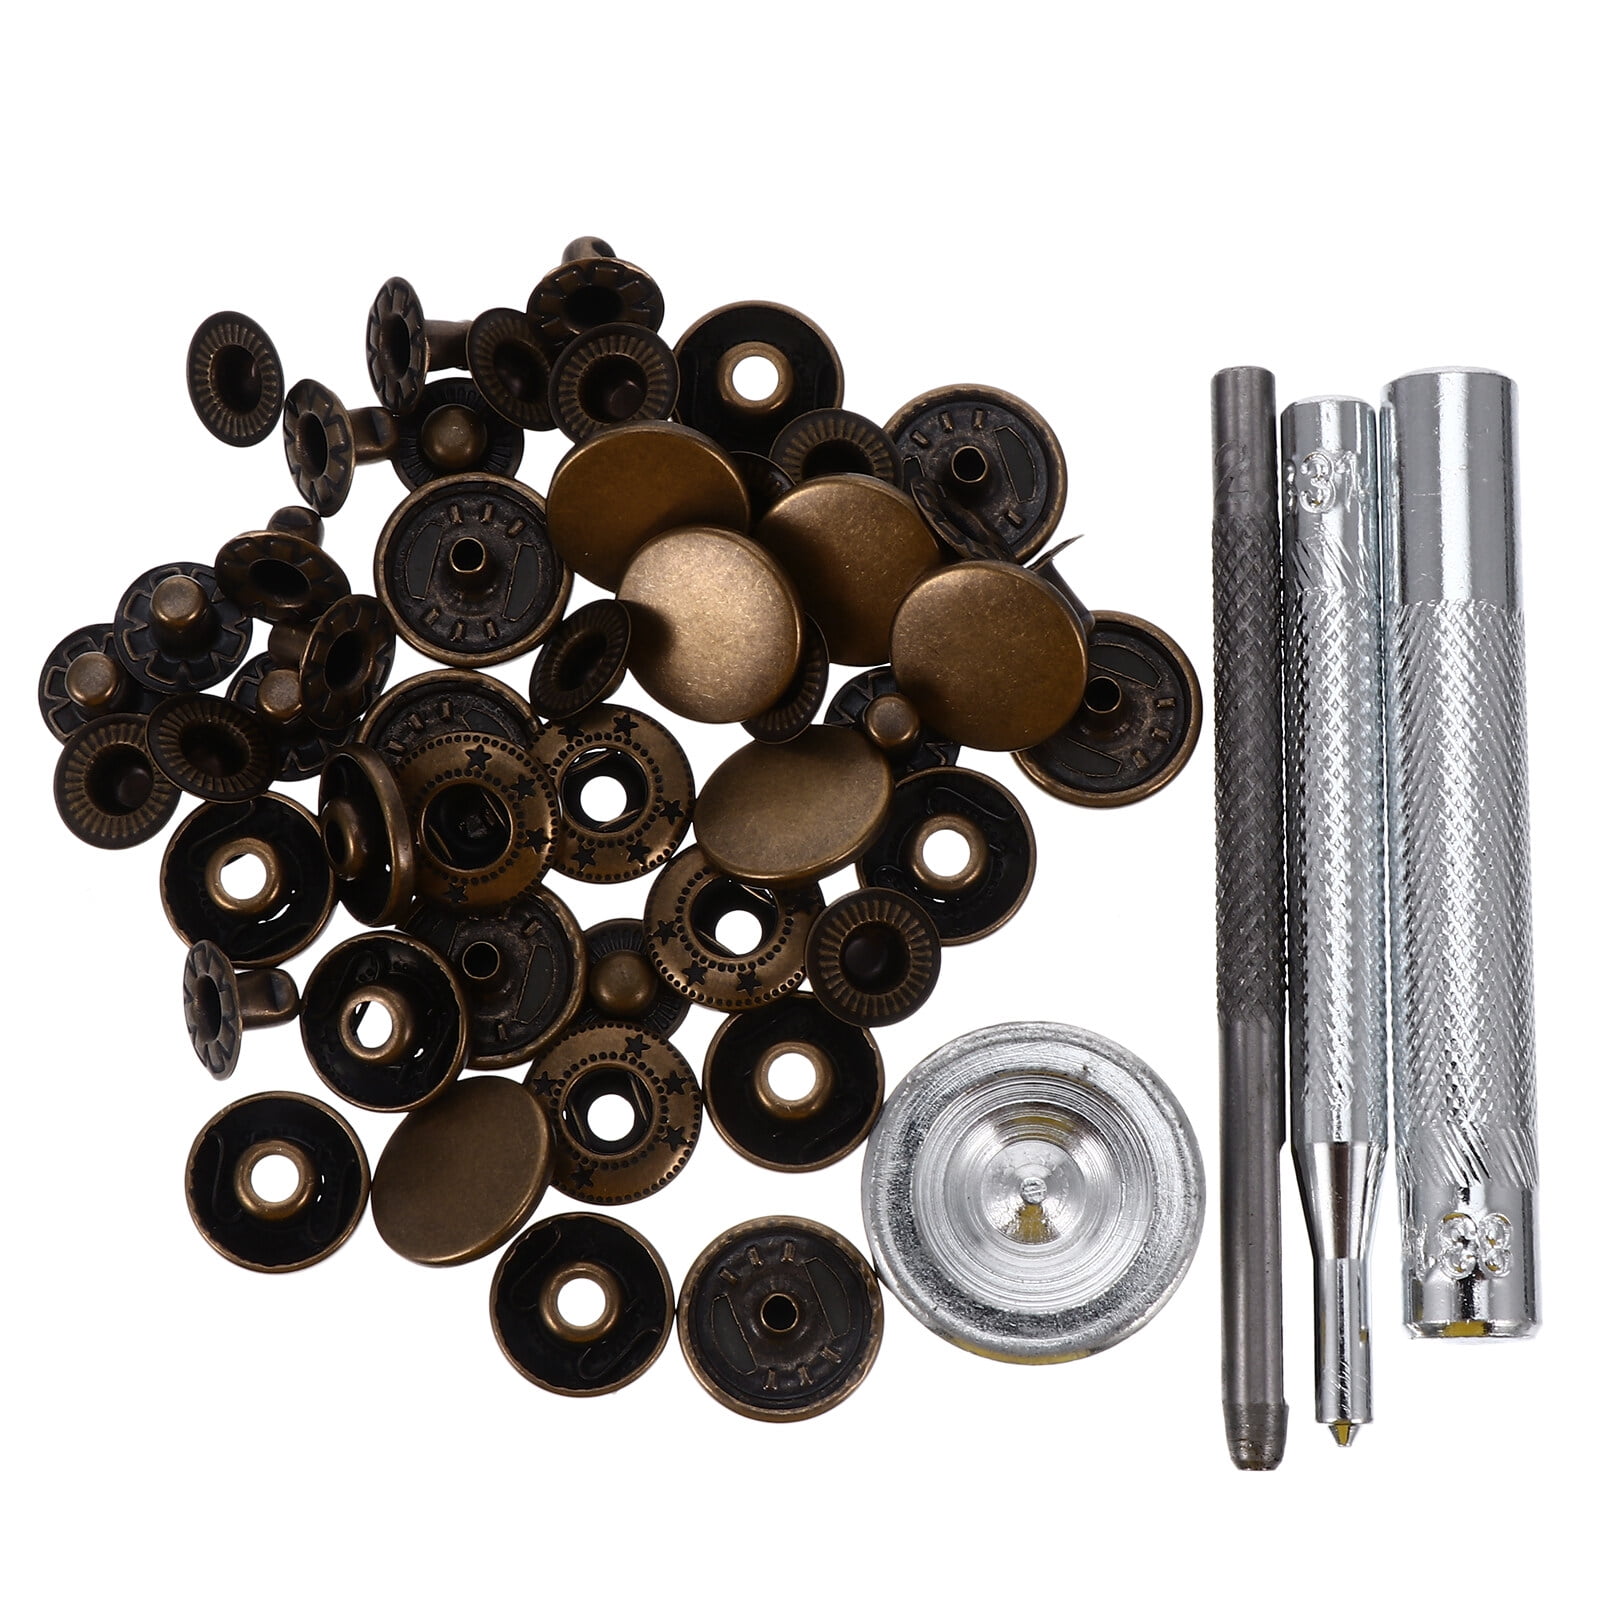 146 Set Snap Fasteners Kit + Leather Rivets, Snap Buttons Press Studs,  Double Cap Rivet With Fixing Tools For Leather